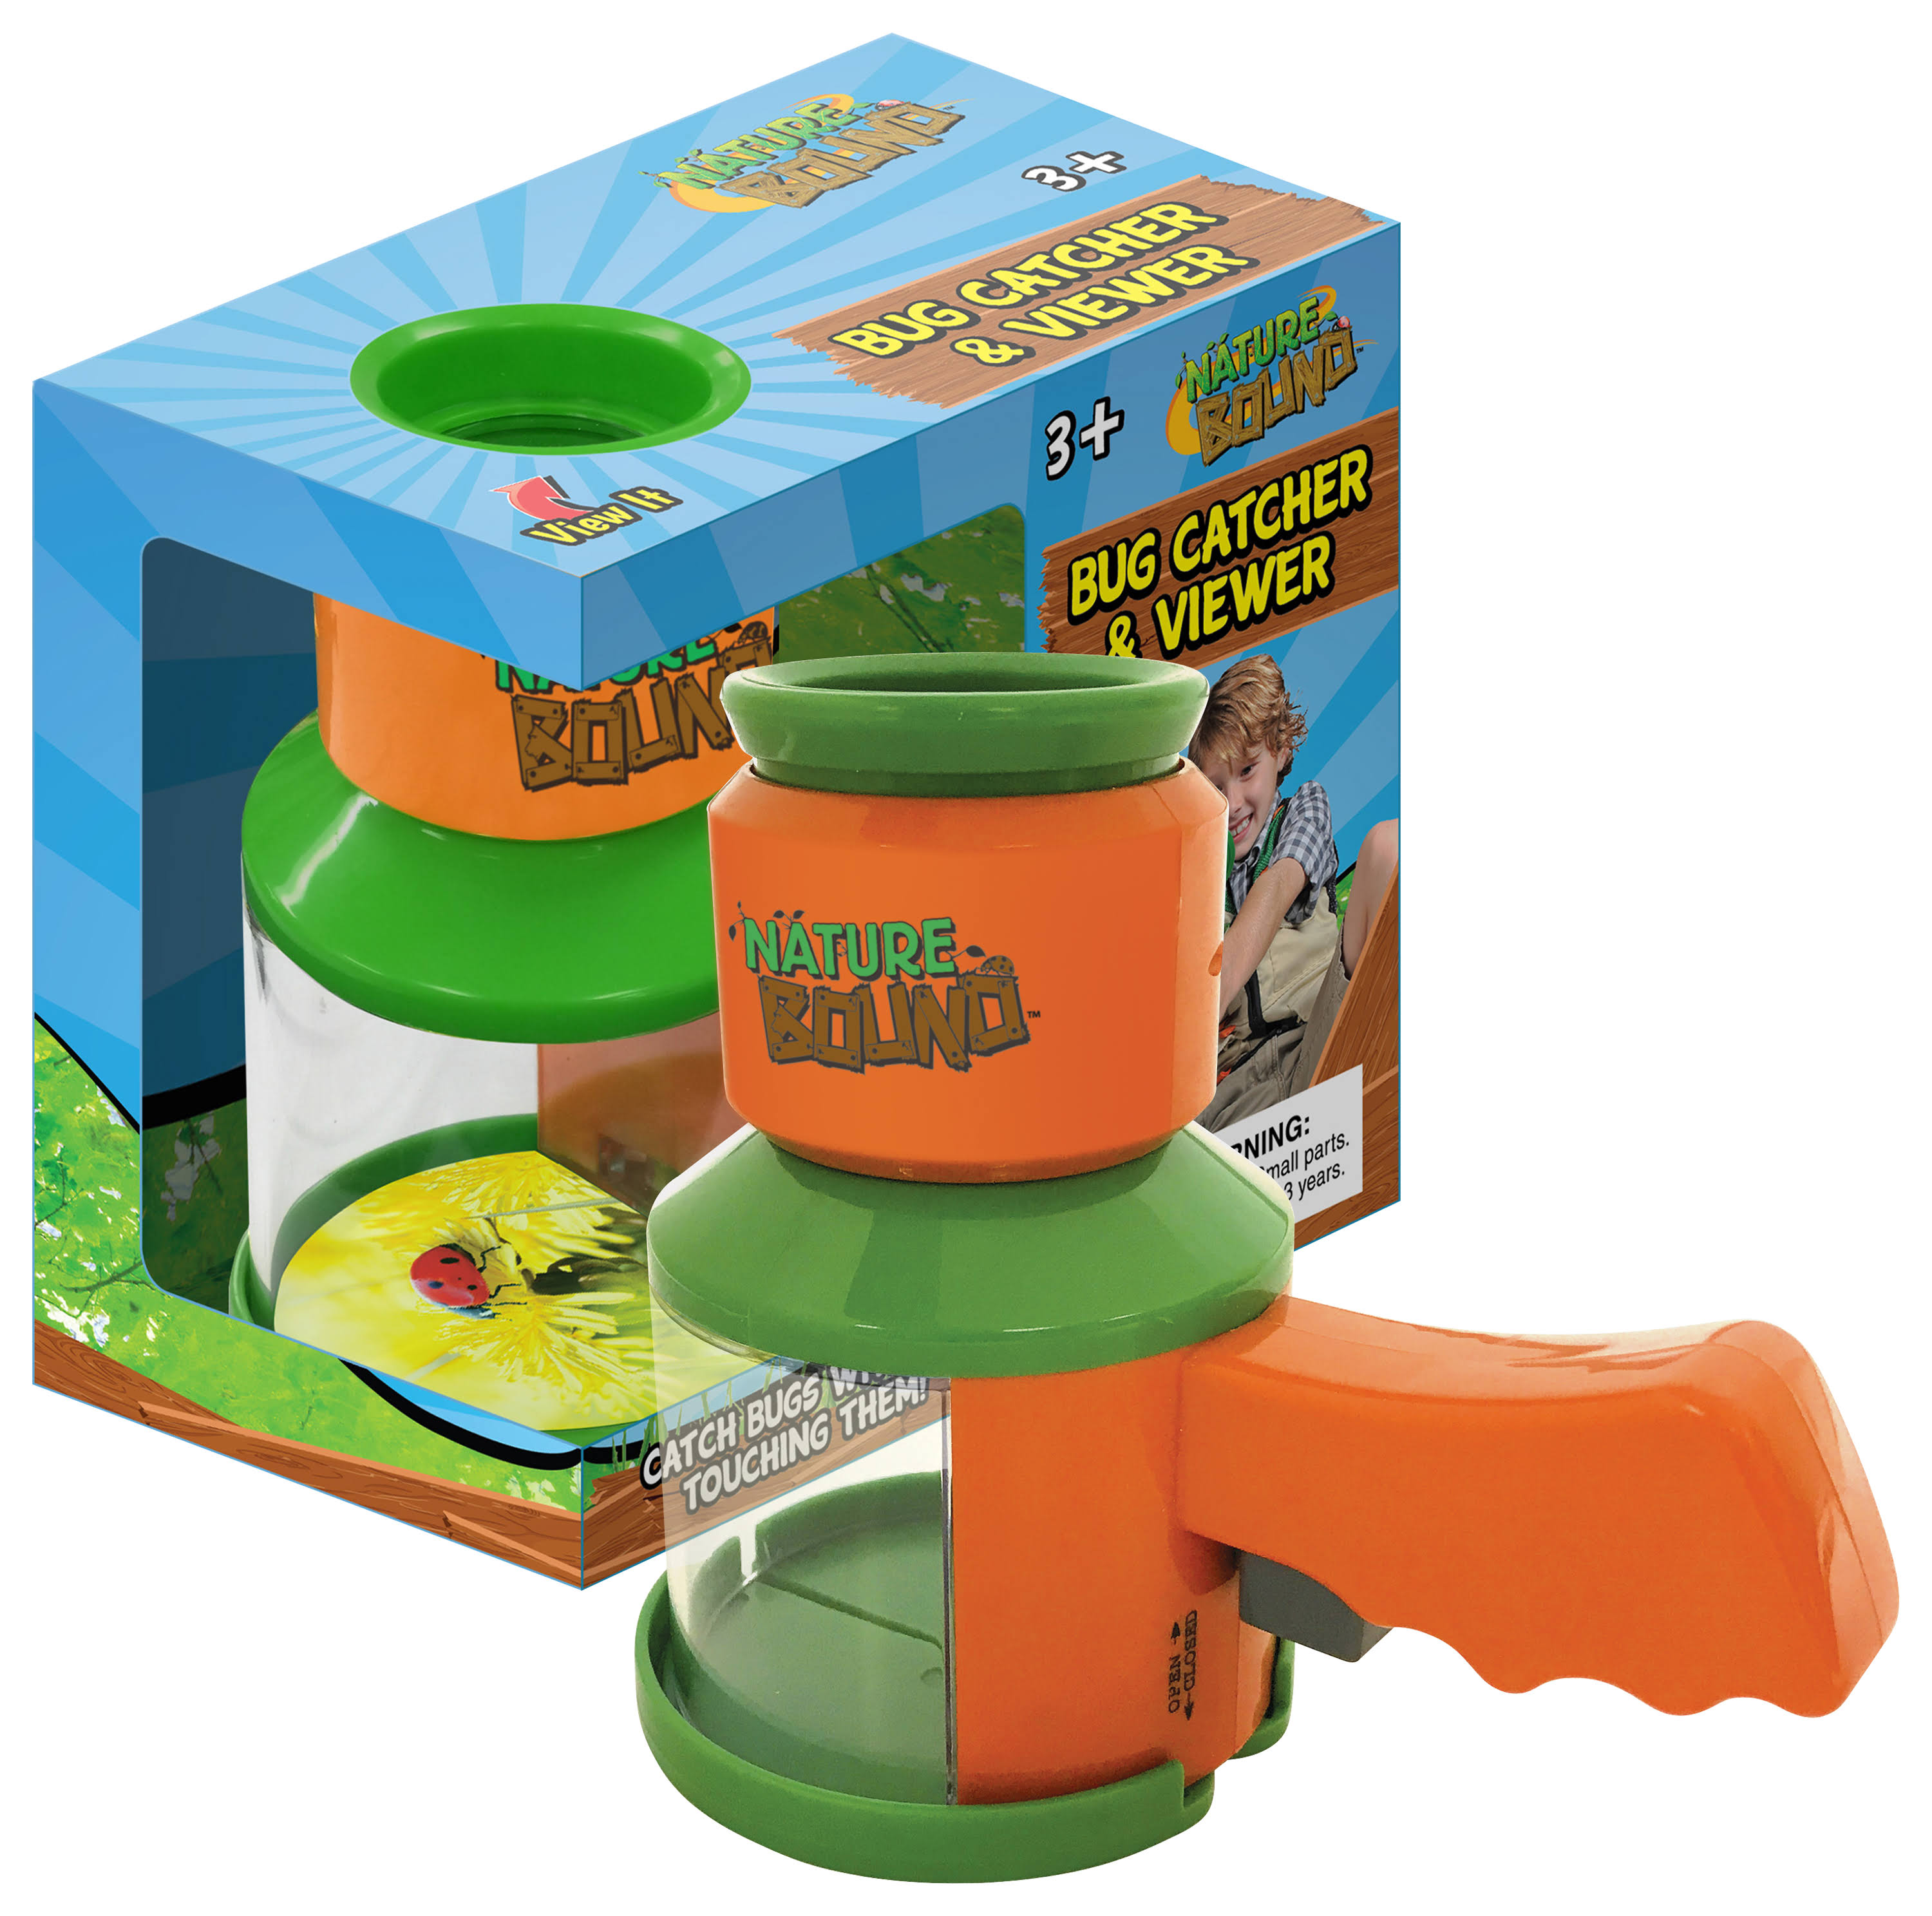 Nature Bound Bug Catcher and Viewer For Outdoor Exploration of Insects